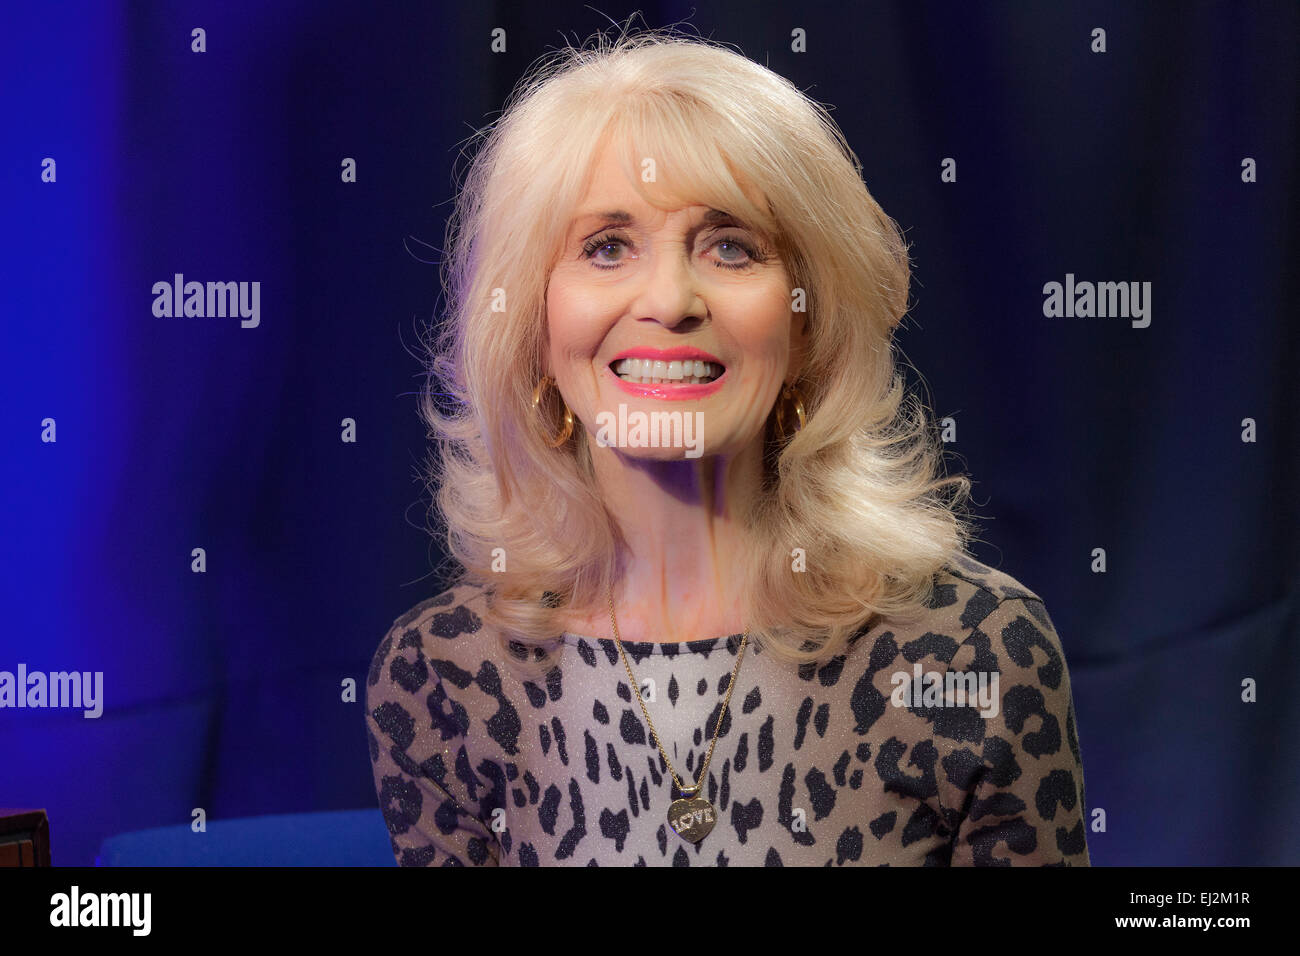 Walsall, West Midlands, UK. 20 March 2015. English pop singer Julie Rogers at a recording of ‘The David Hamilton Show’ for Big Centre TV. Hosted by presenter and broadcaster ‘Diddy’ David Hamilton the show features famous personalities from across the music and television spectrum. Credit:  John Henshall / Alamy Live News PER0520 Stock Photo